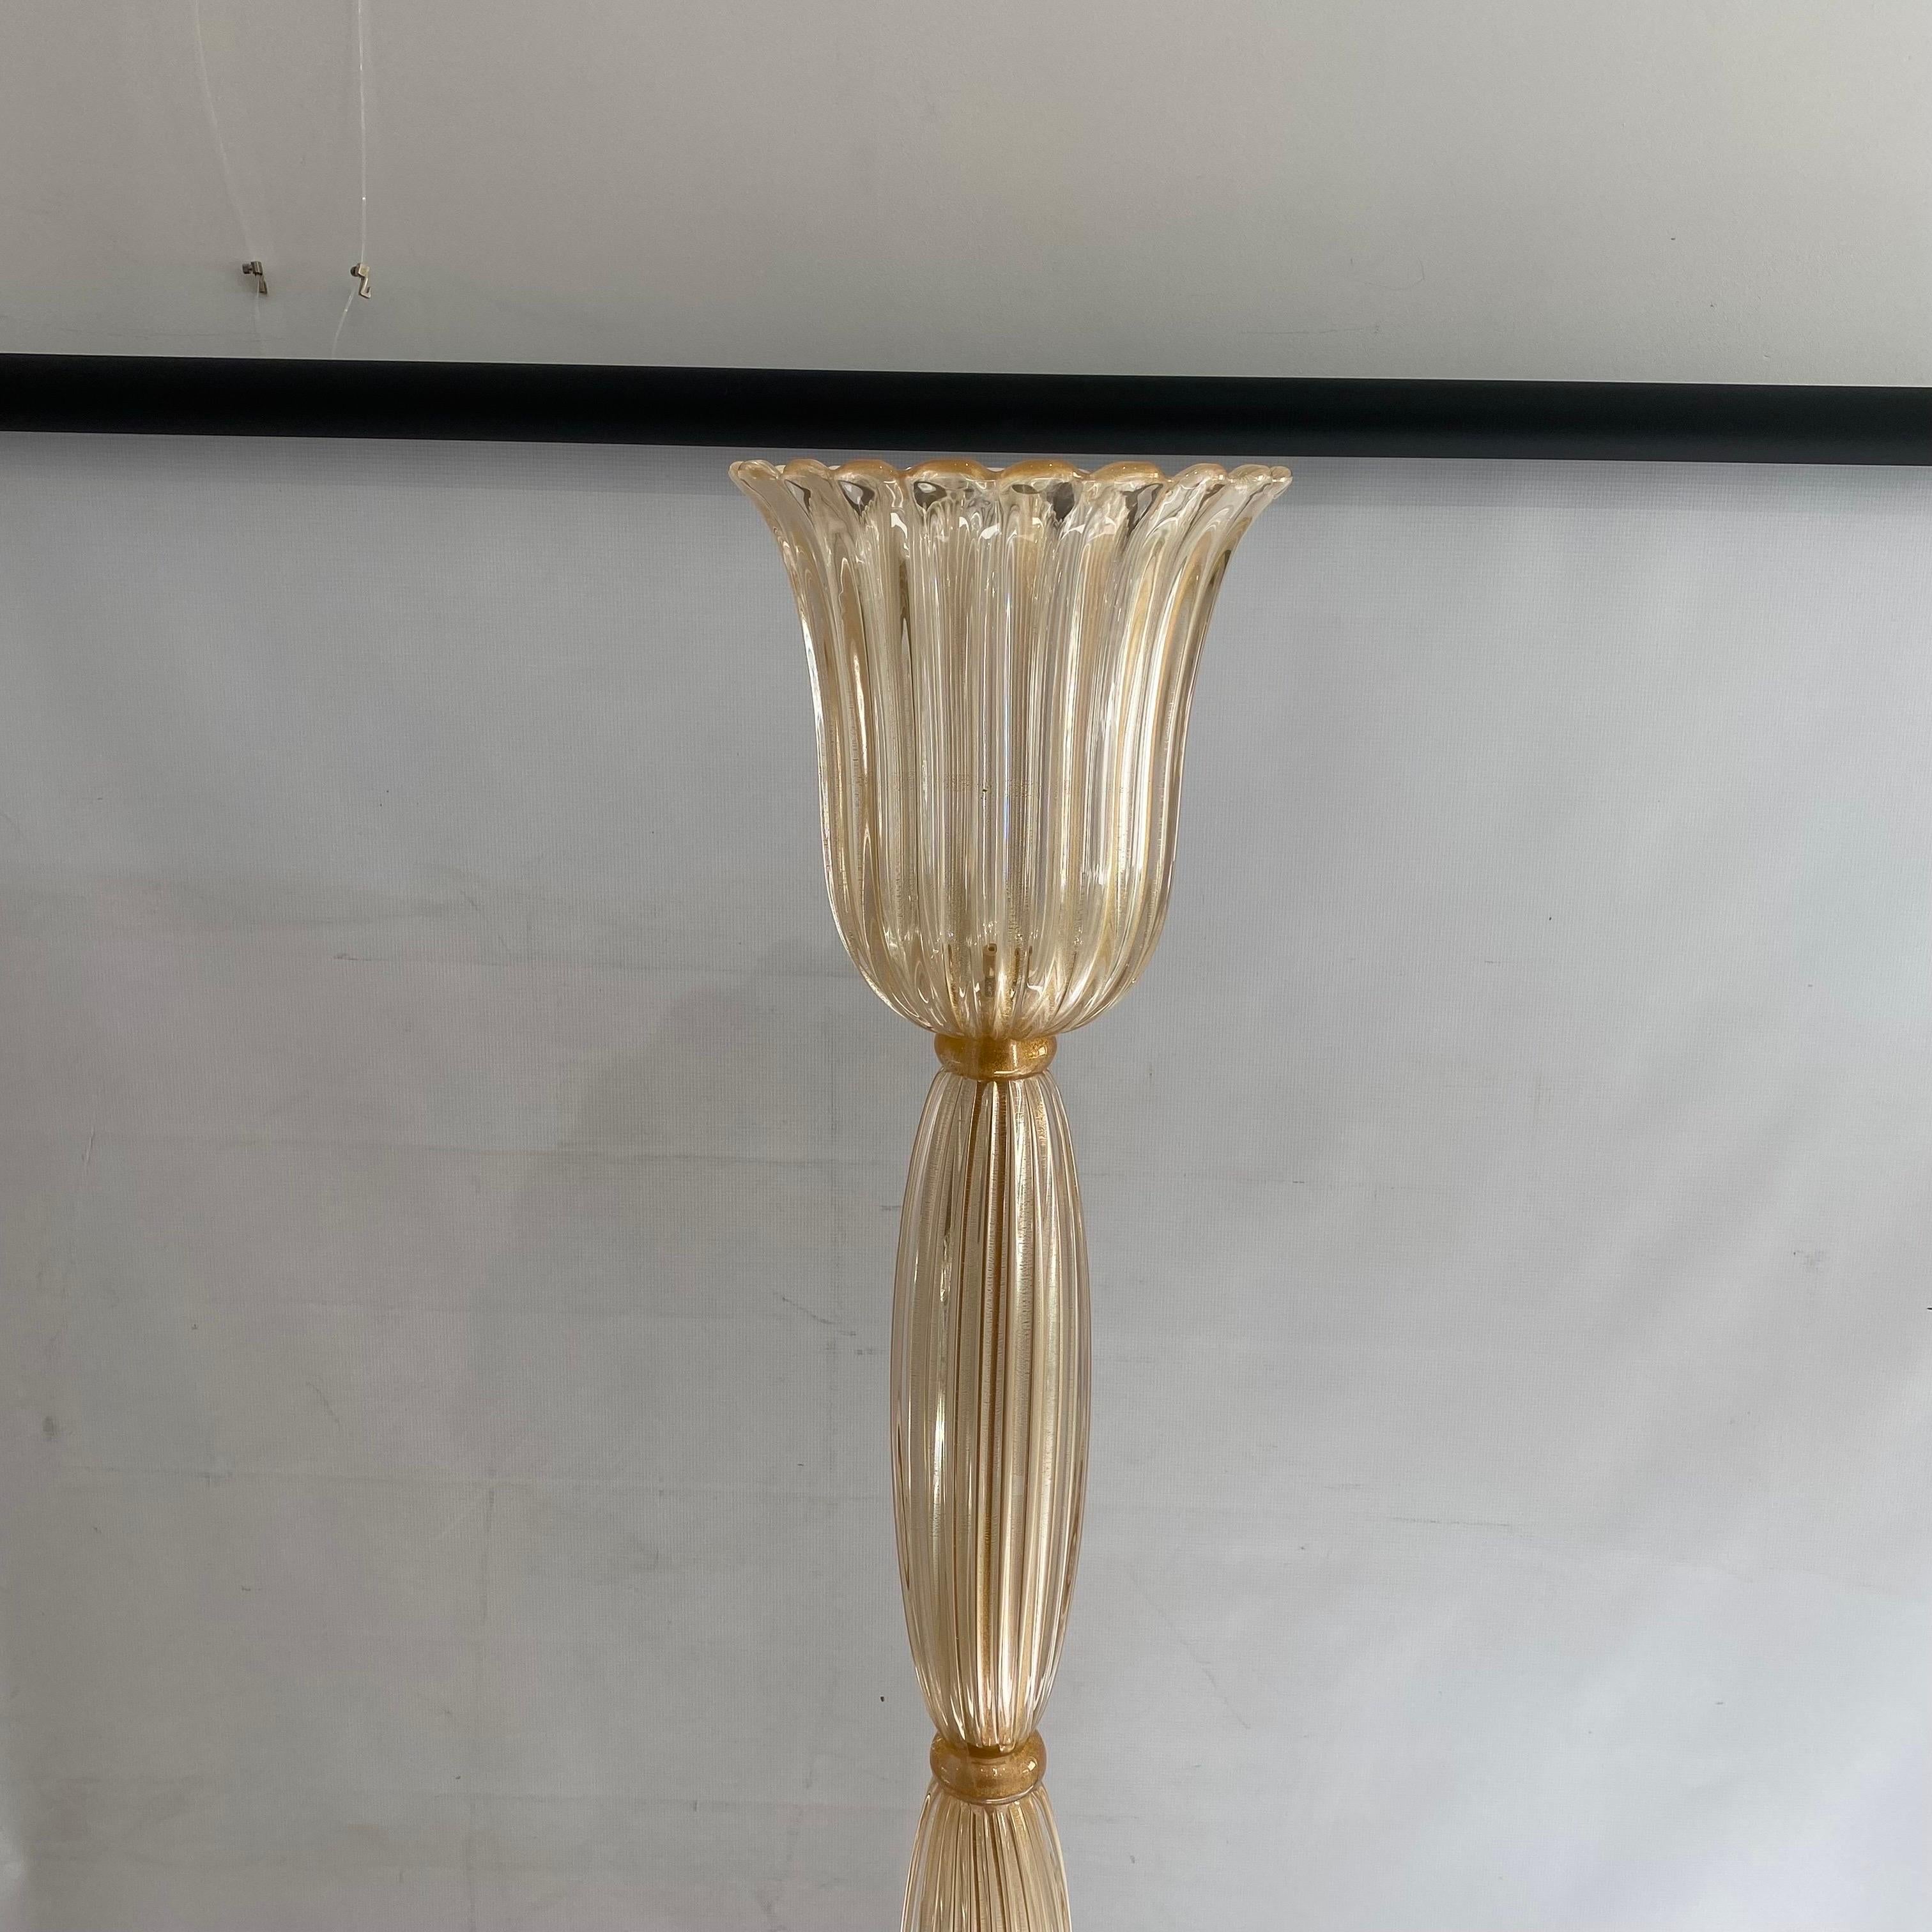 Hand-Crafted Signed Archimede Seguso Murano Glass Floor Lamp Gold Italian Art Deco 1980s For Sale